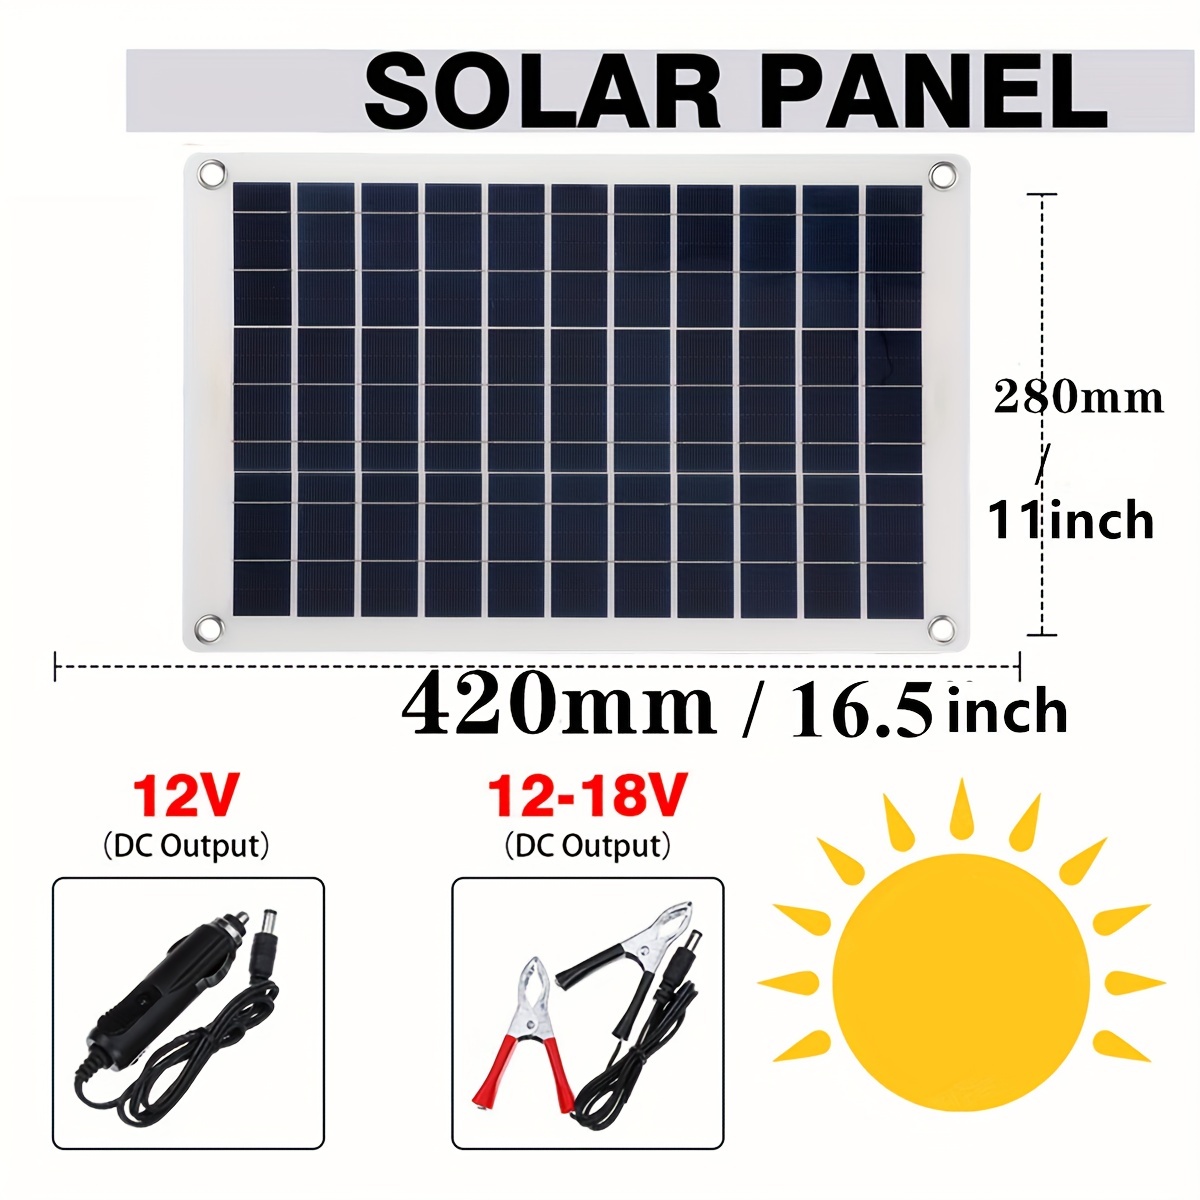 2pcs 18v 12v 5v solar panel kit dual usb dc with 60a 100a solar controller solar cells for car yacht rv portable battery charger